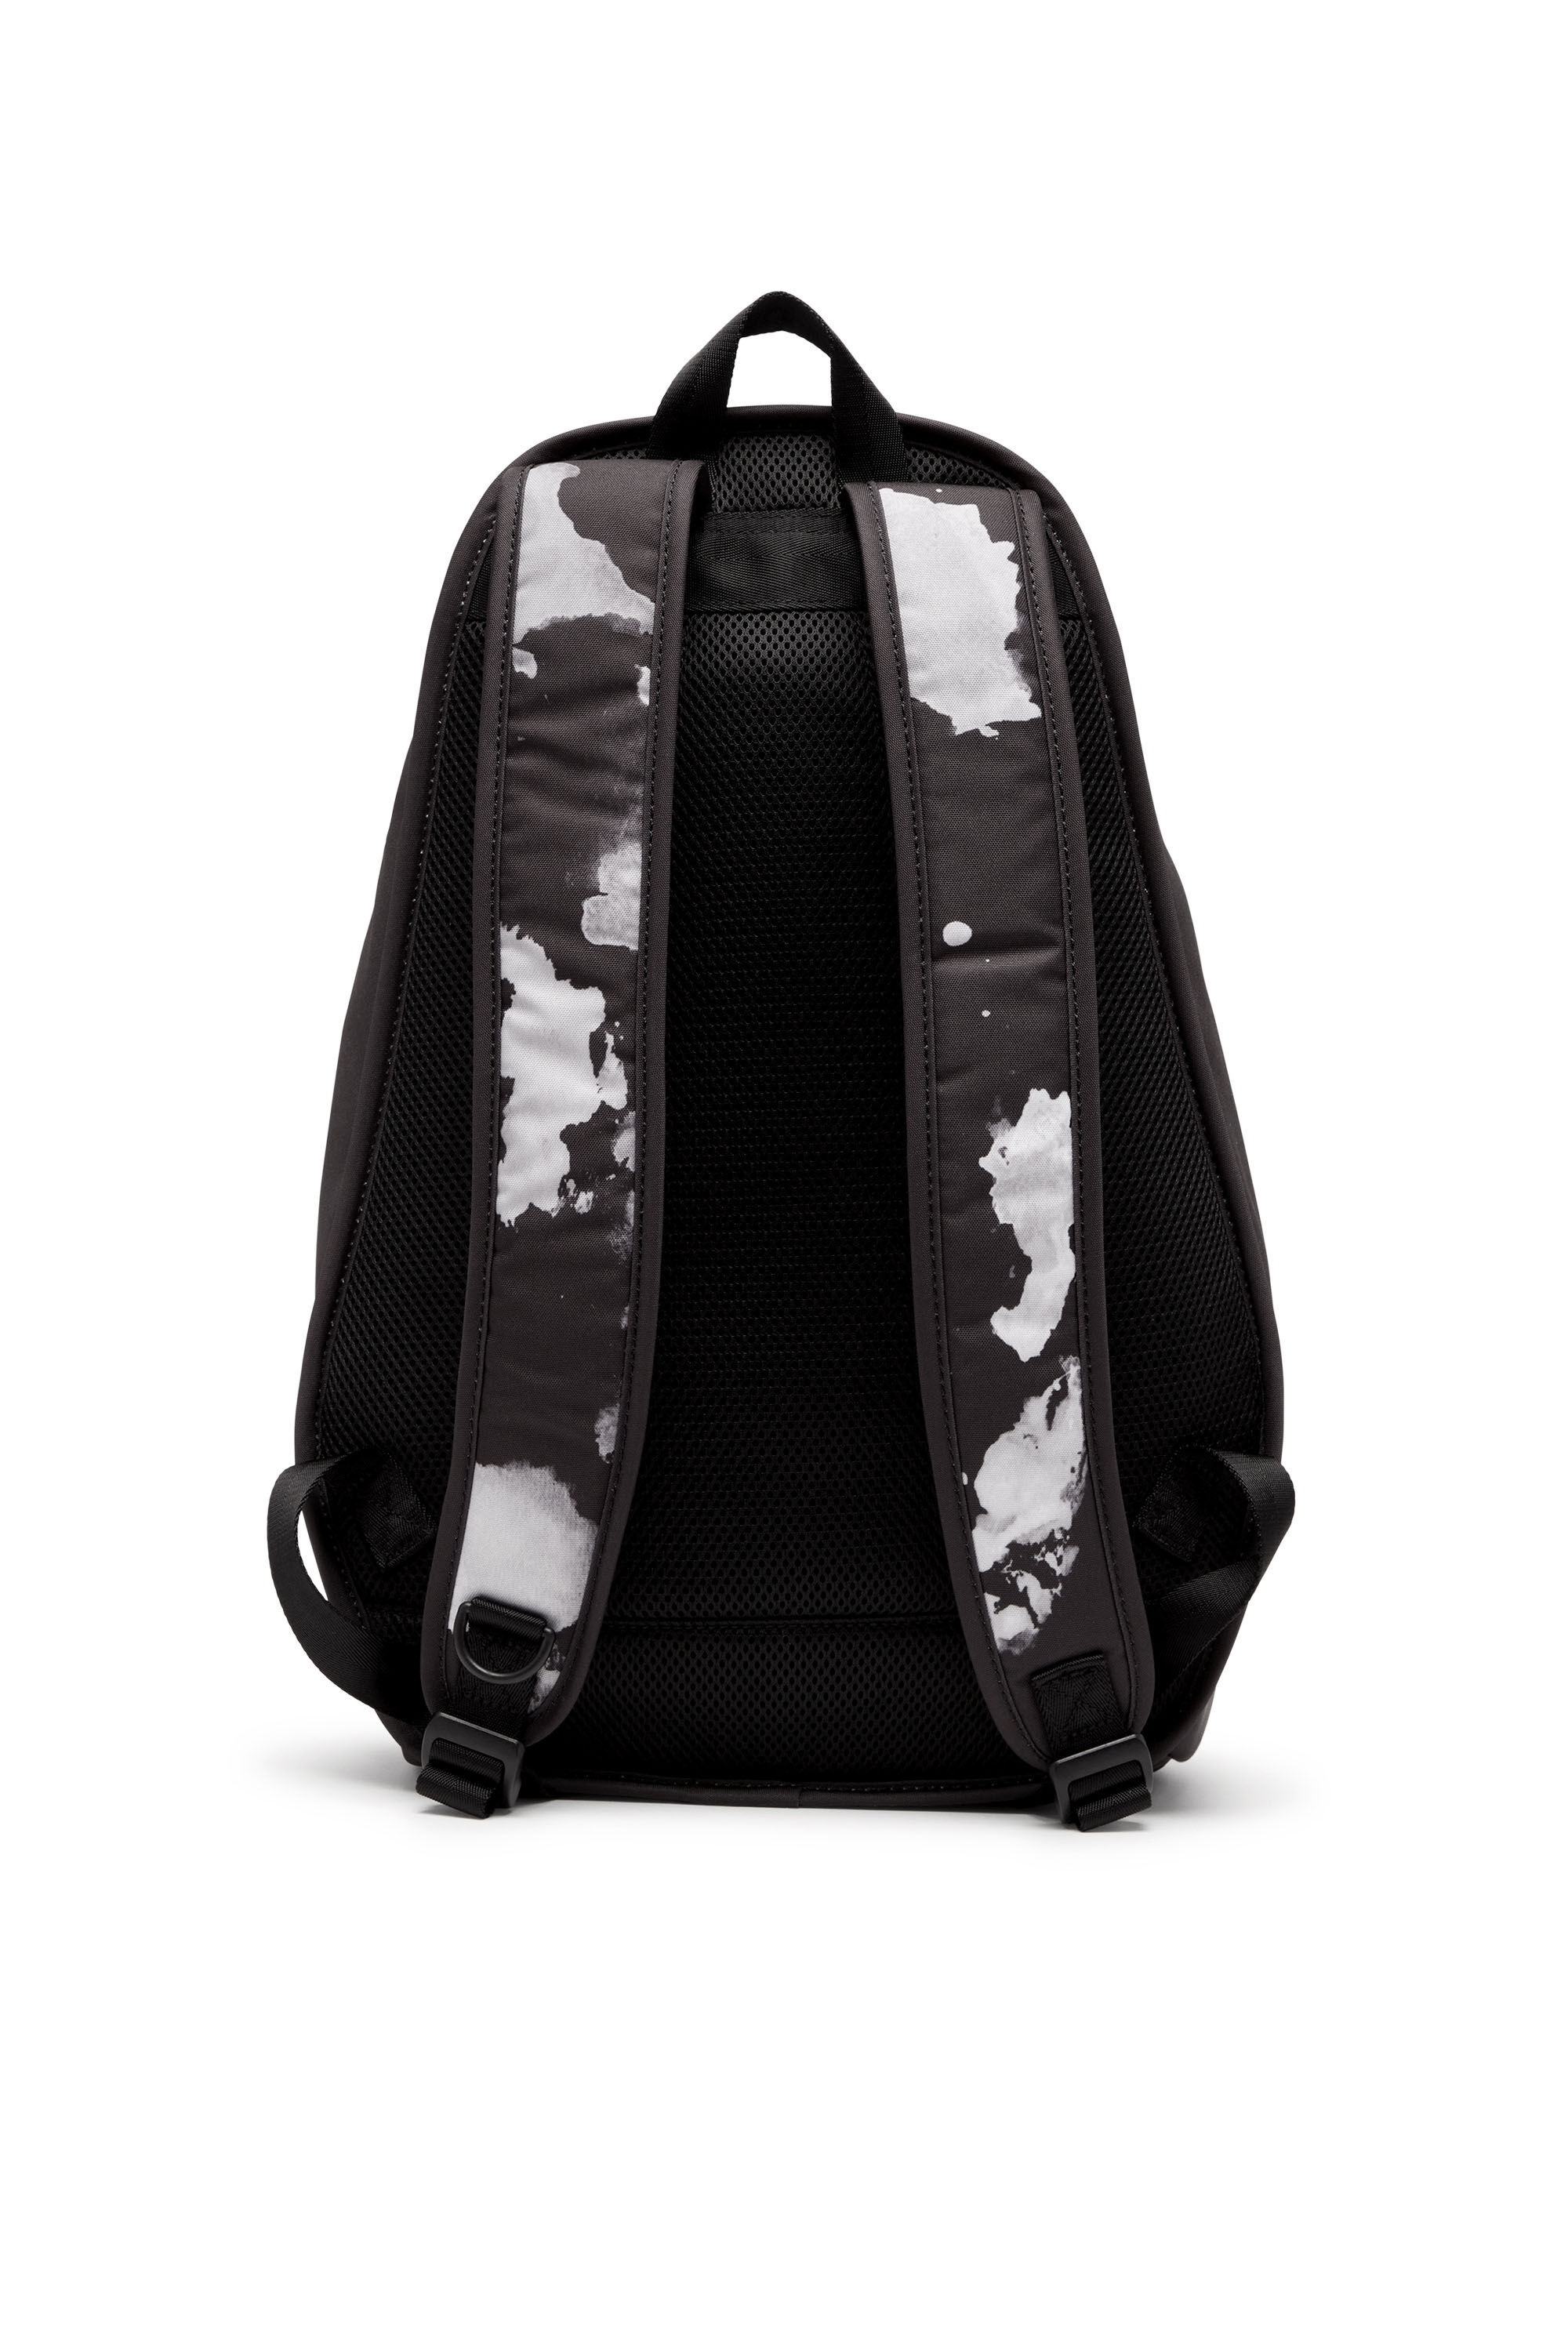 RAVE BACKPACK X - 3